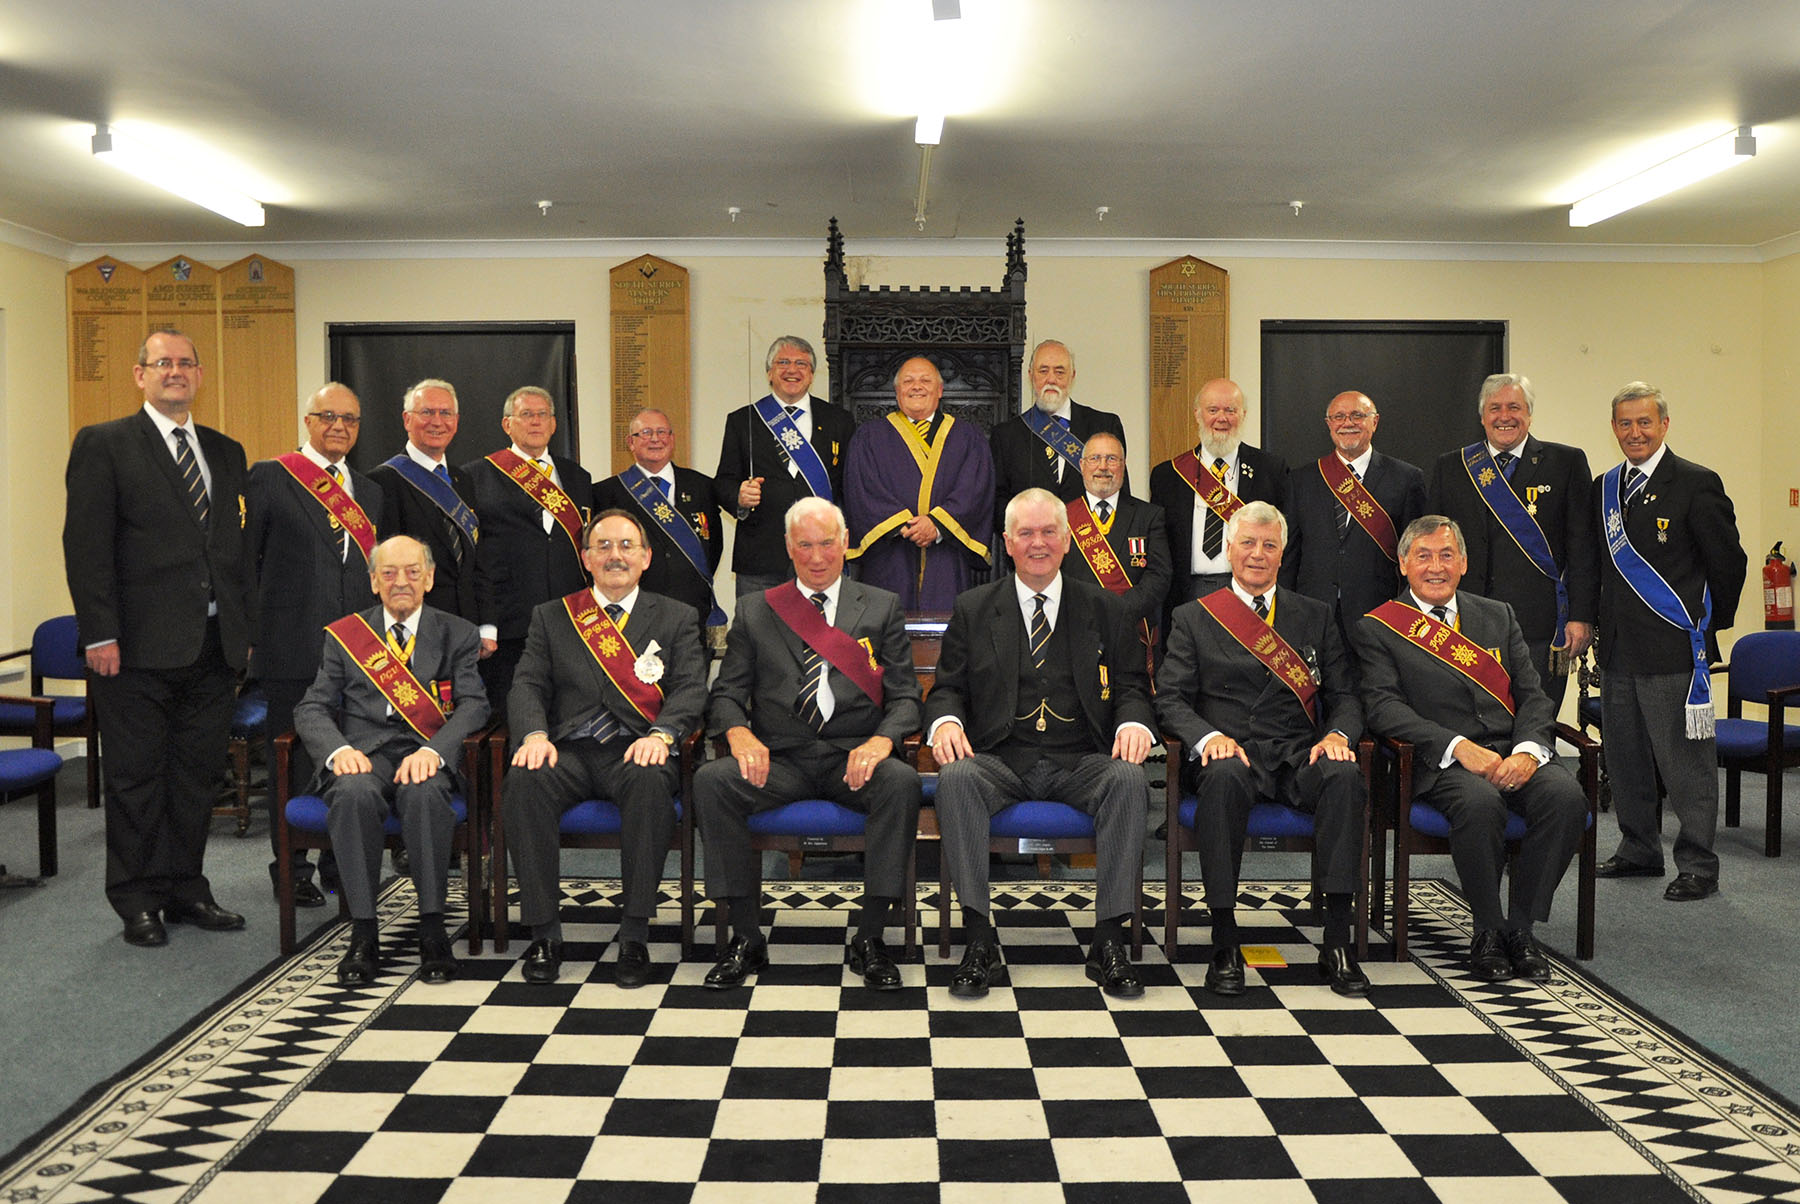 Warlingham Conclave No. 291 Assembly of Princes